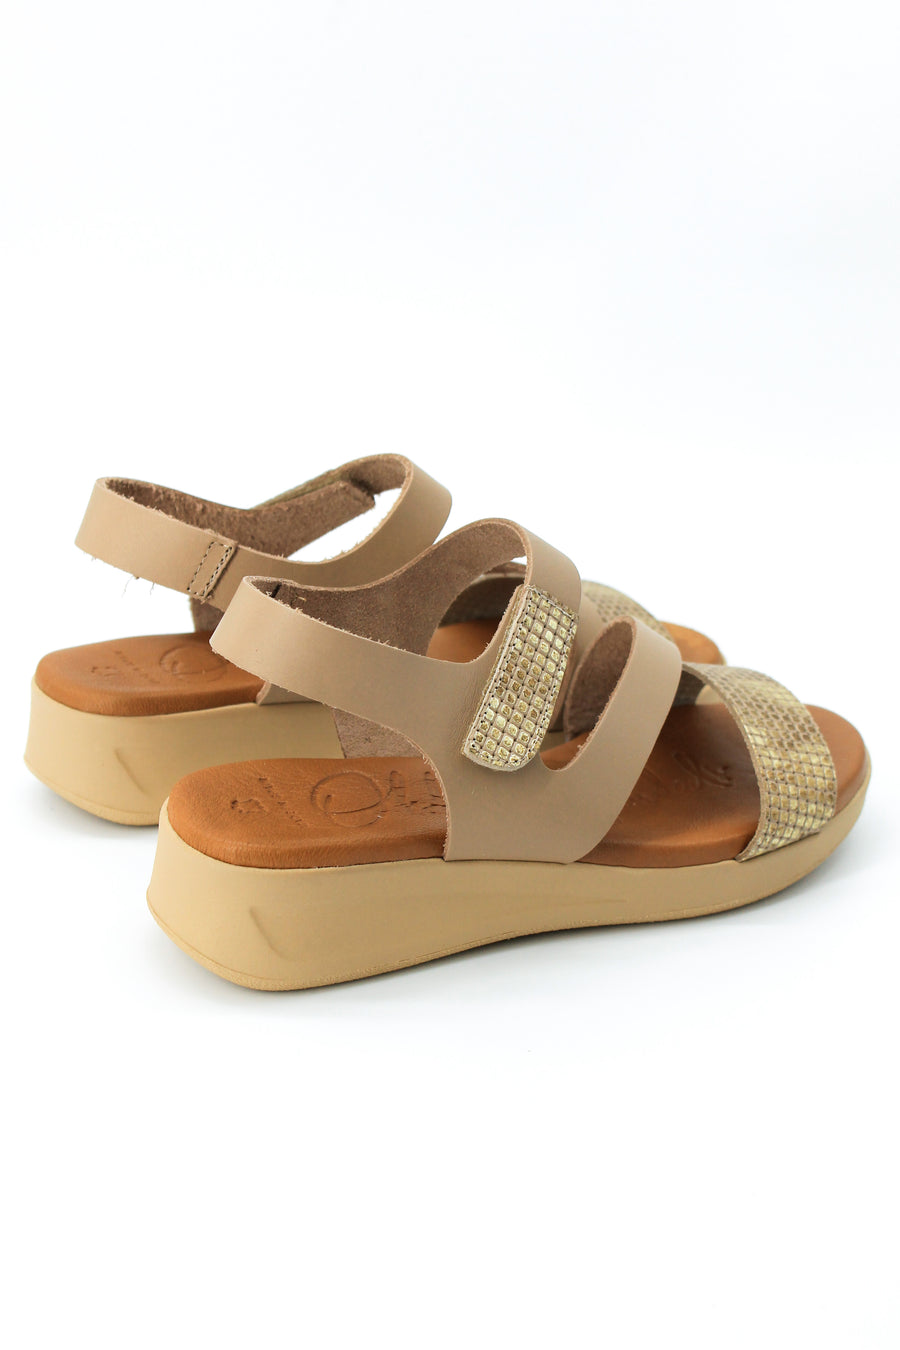 Oh My Sandals 5182 Taupe